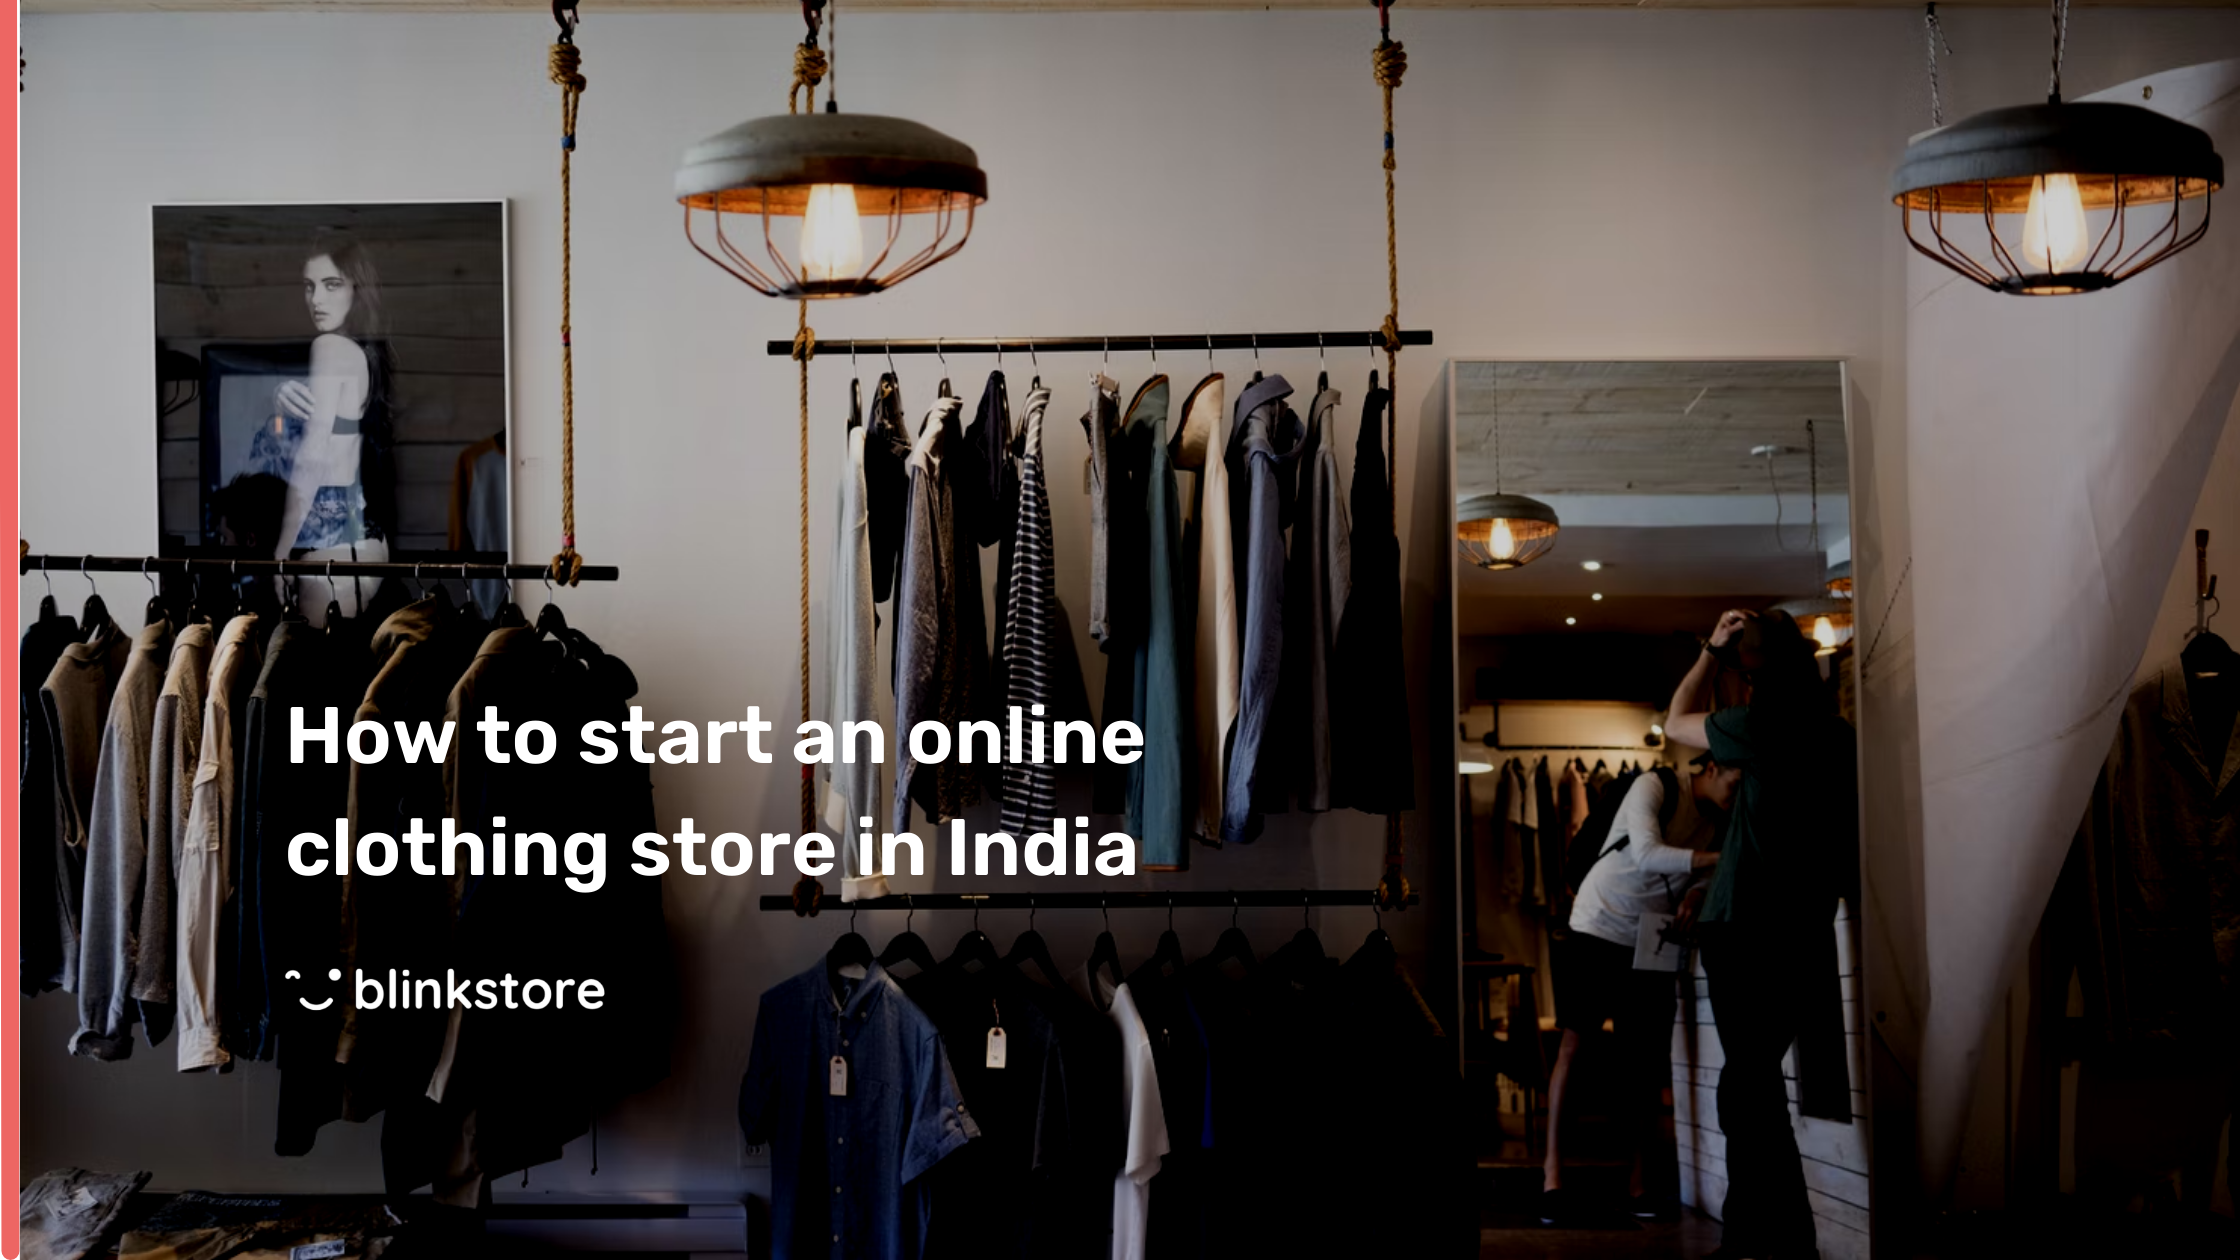 How to start an online clothing store in India